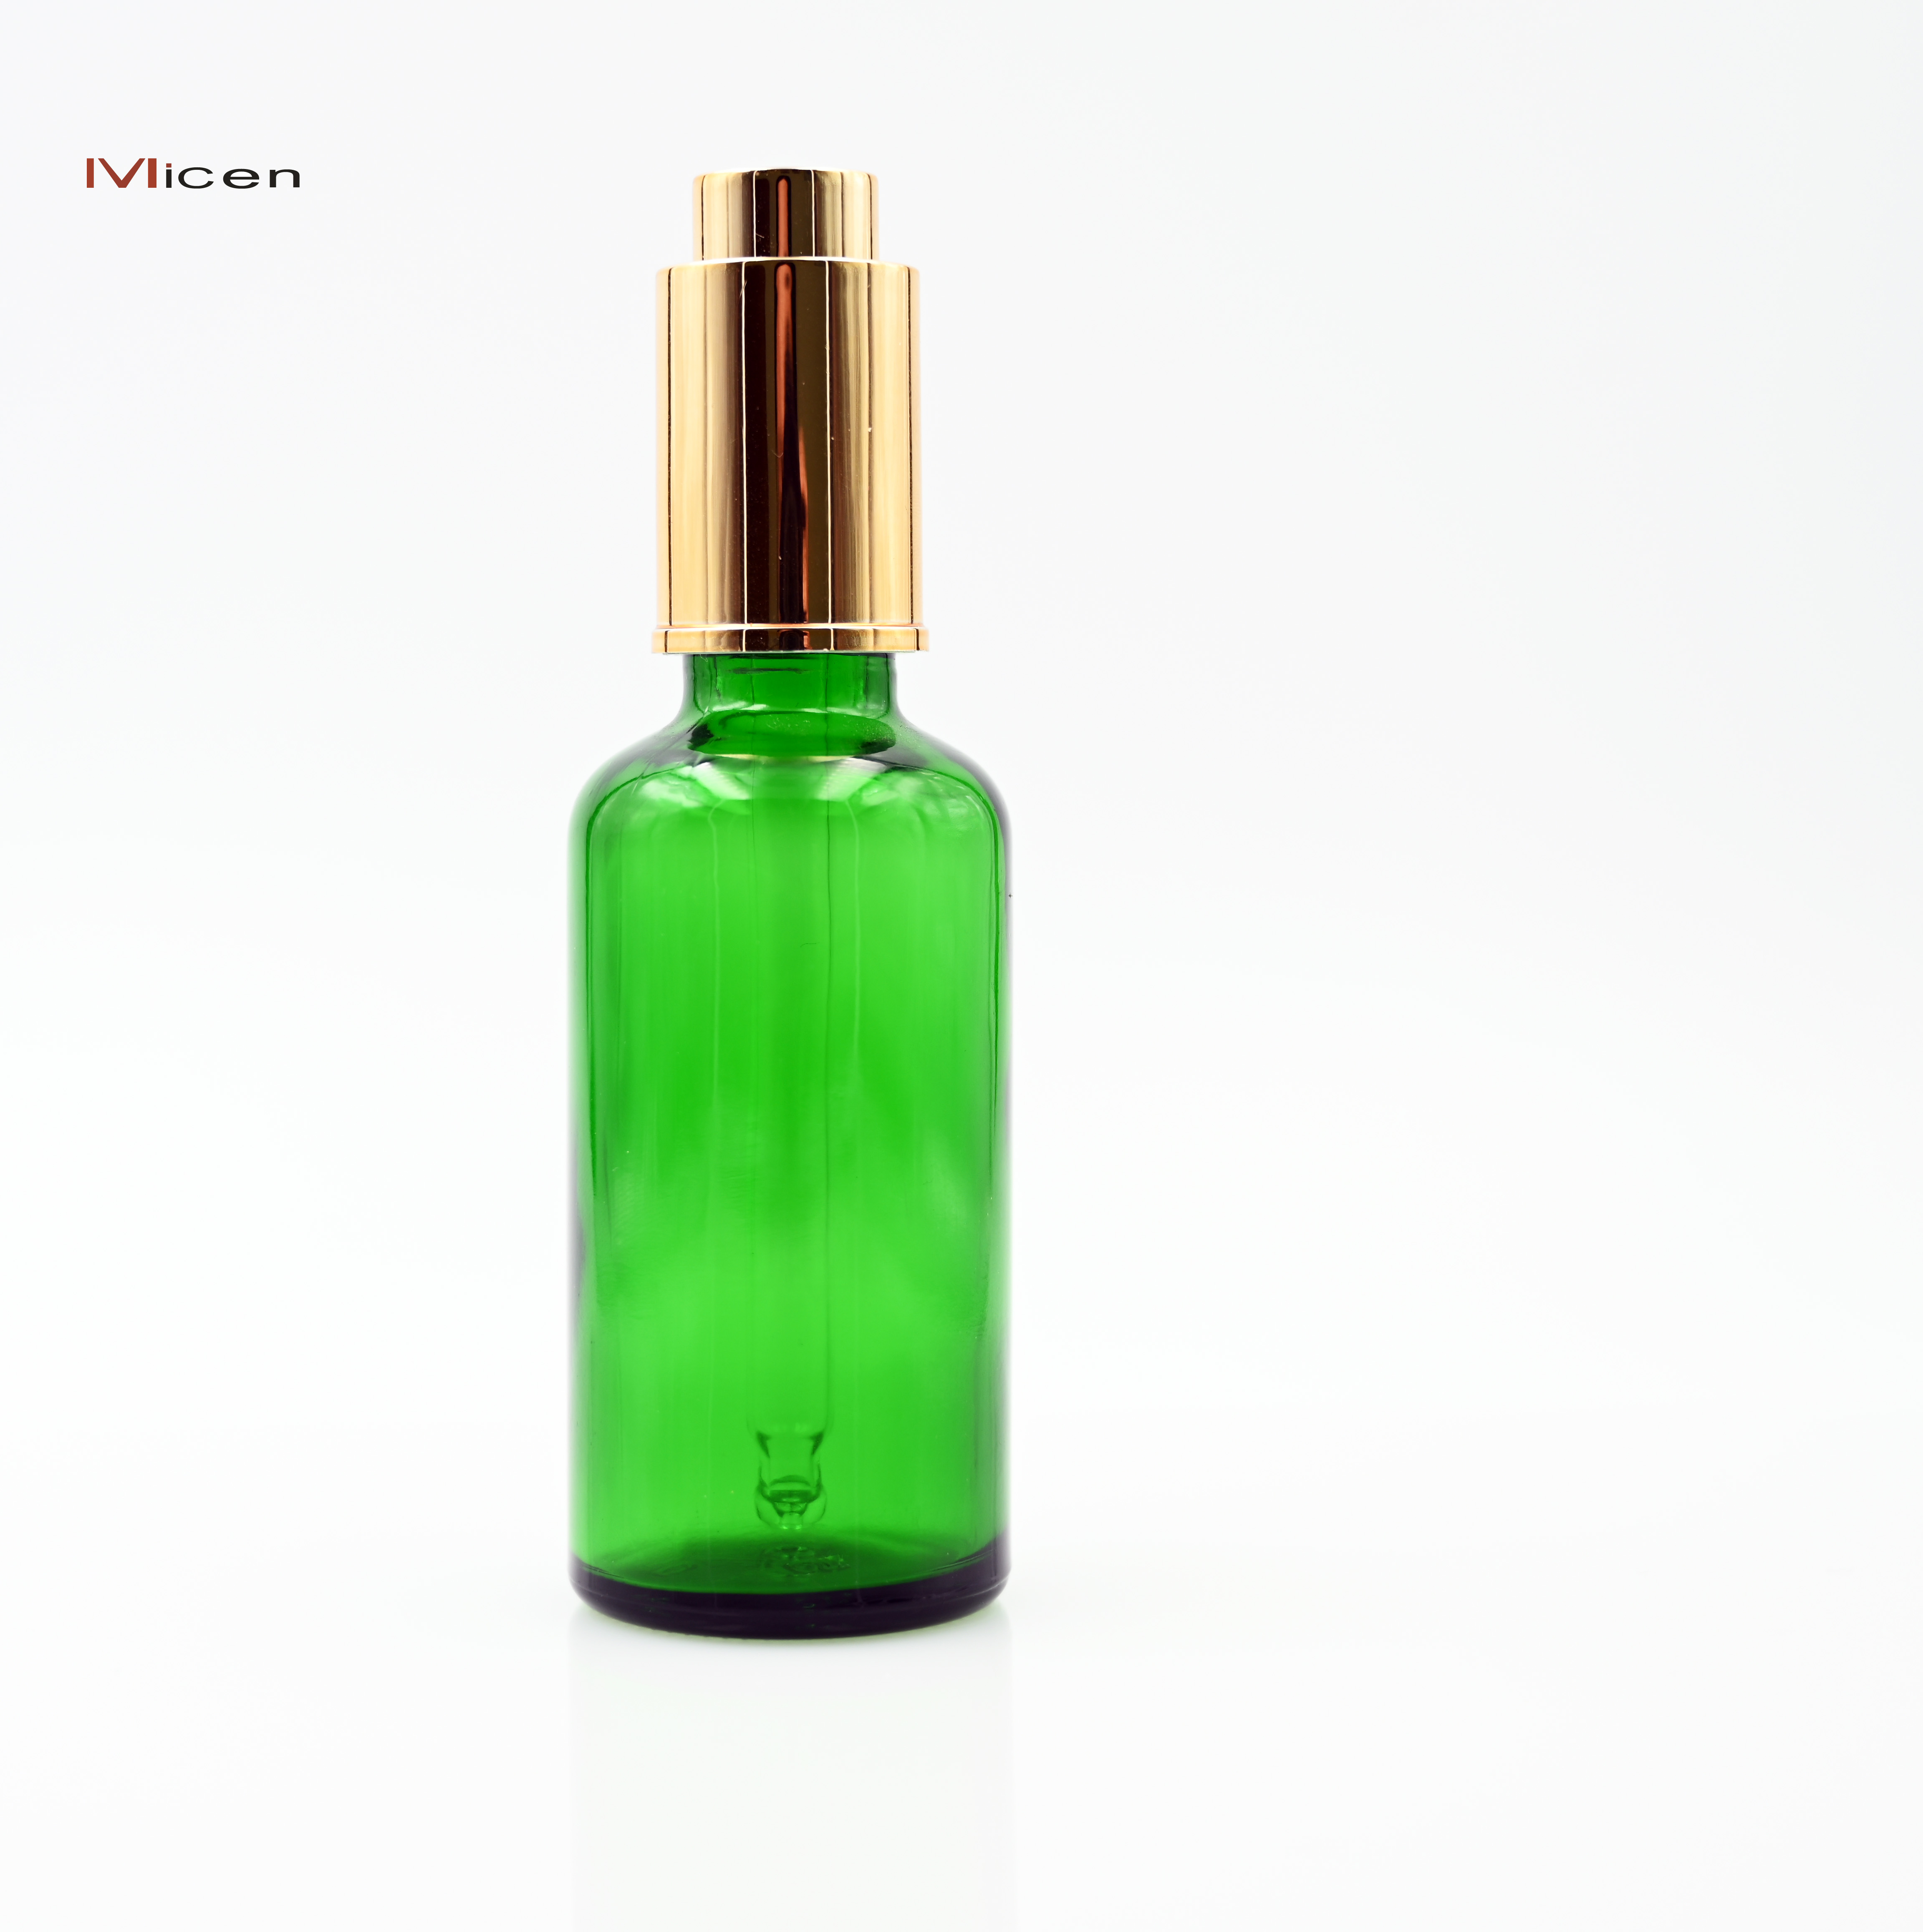 20-100ml Green glass bottle with Push button dropper Featured Image